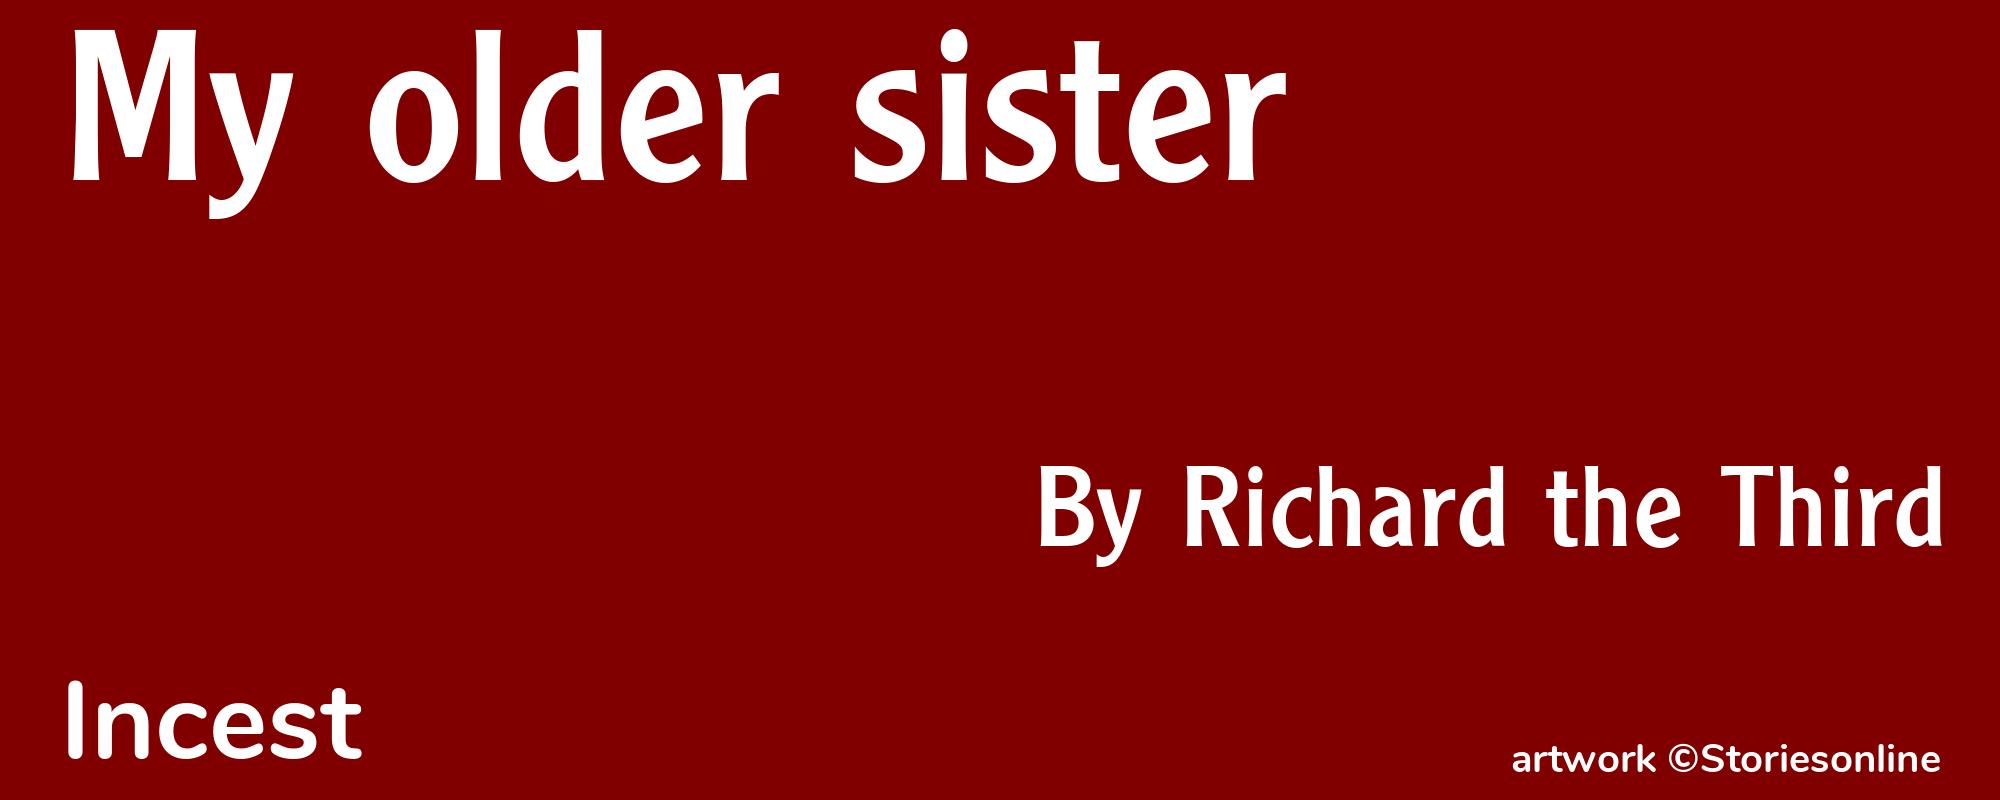 My older sister - Cover